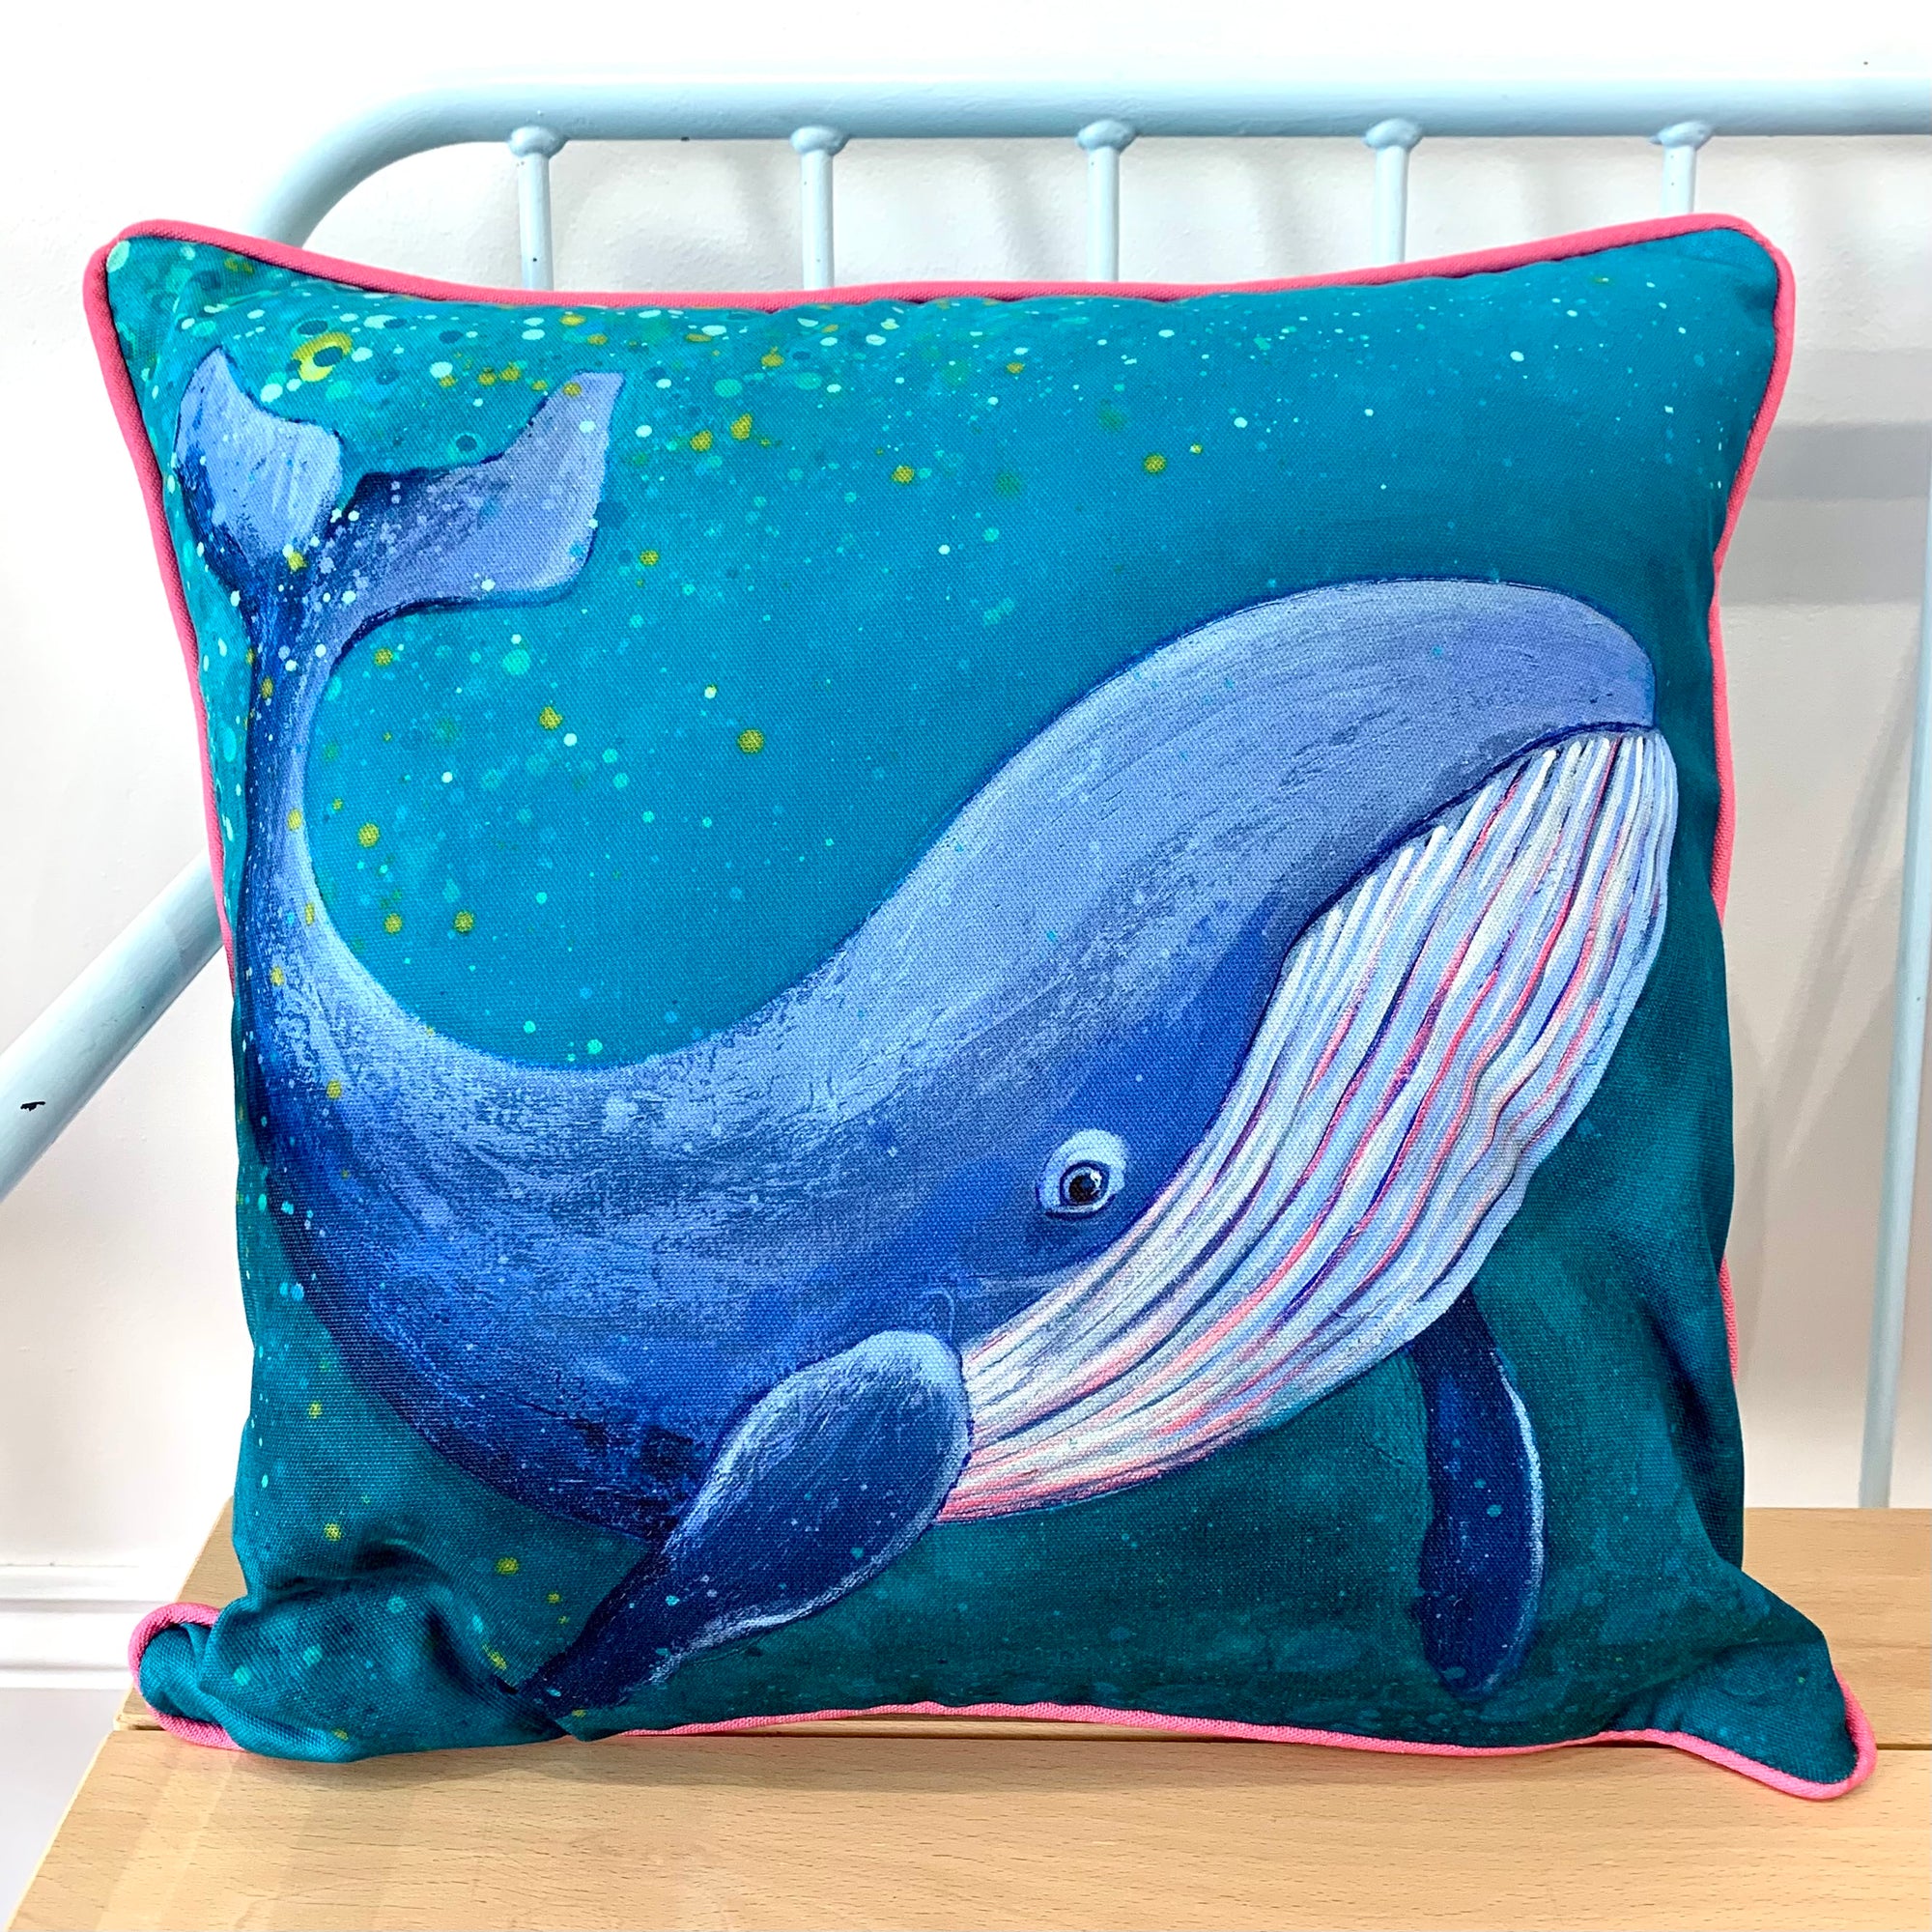 A cushion featuring a blue whale painting on a teal green background with bright pink piping.